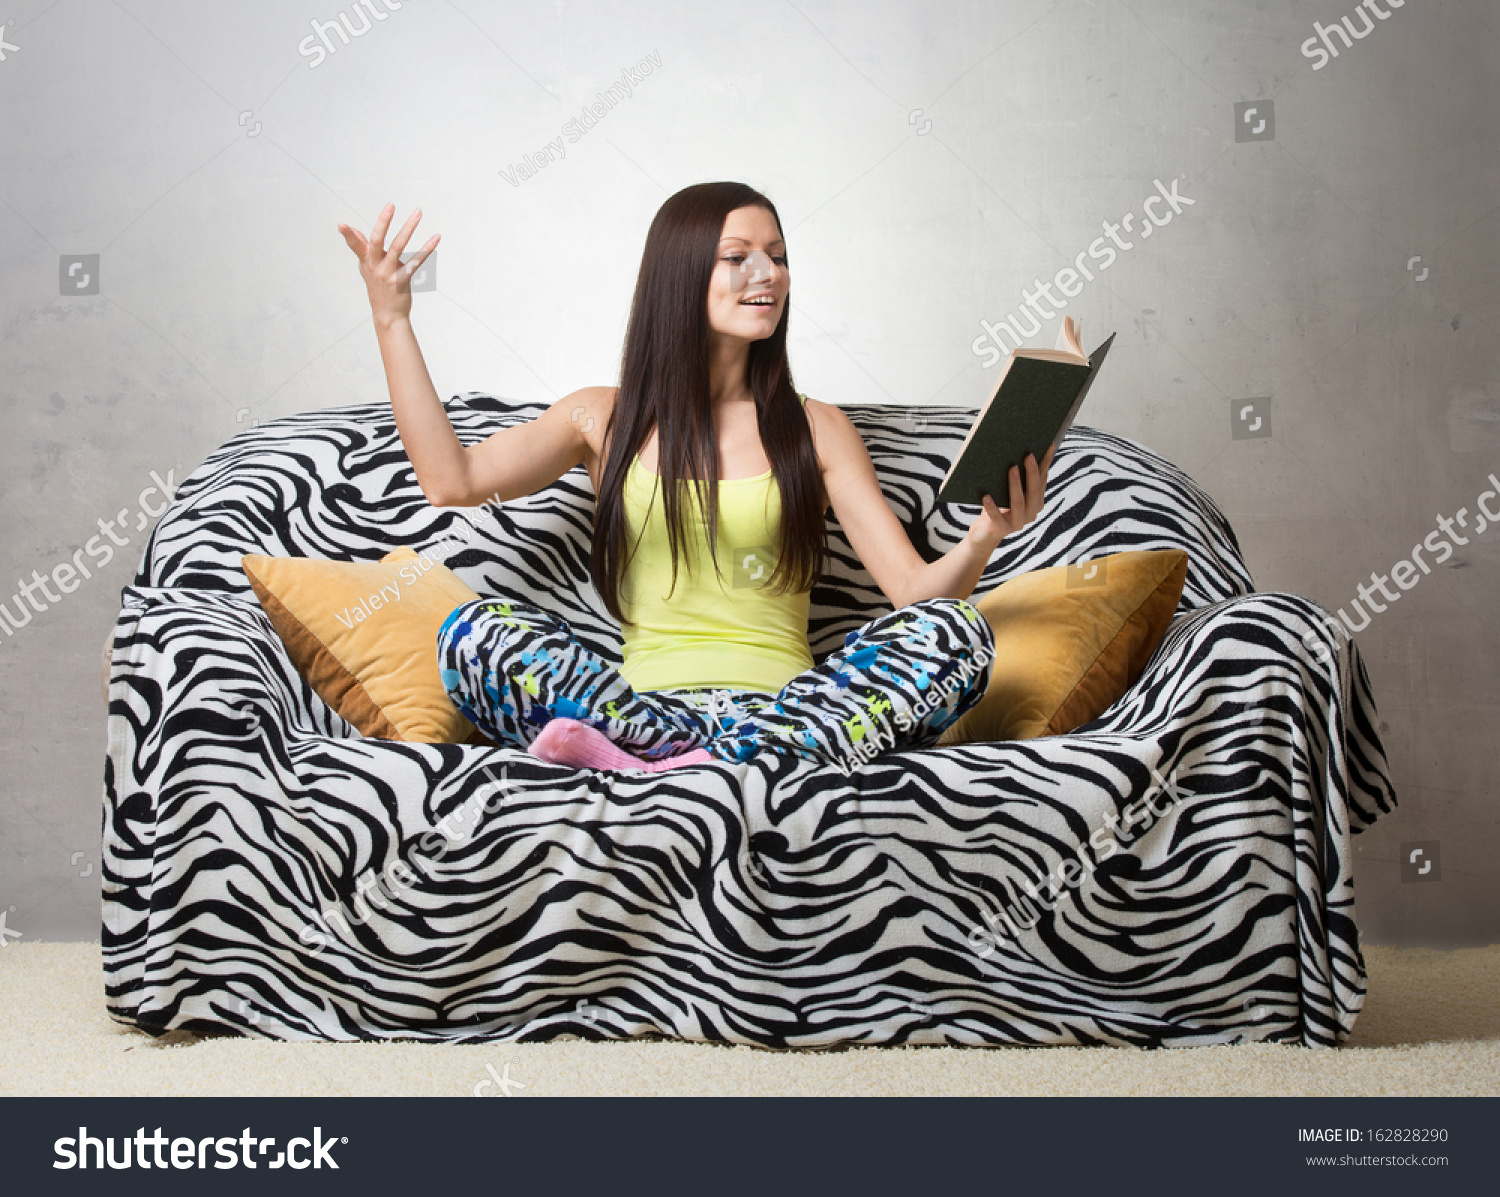 Inspired girl sitting on the sofa and reciting a poem #162828290